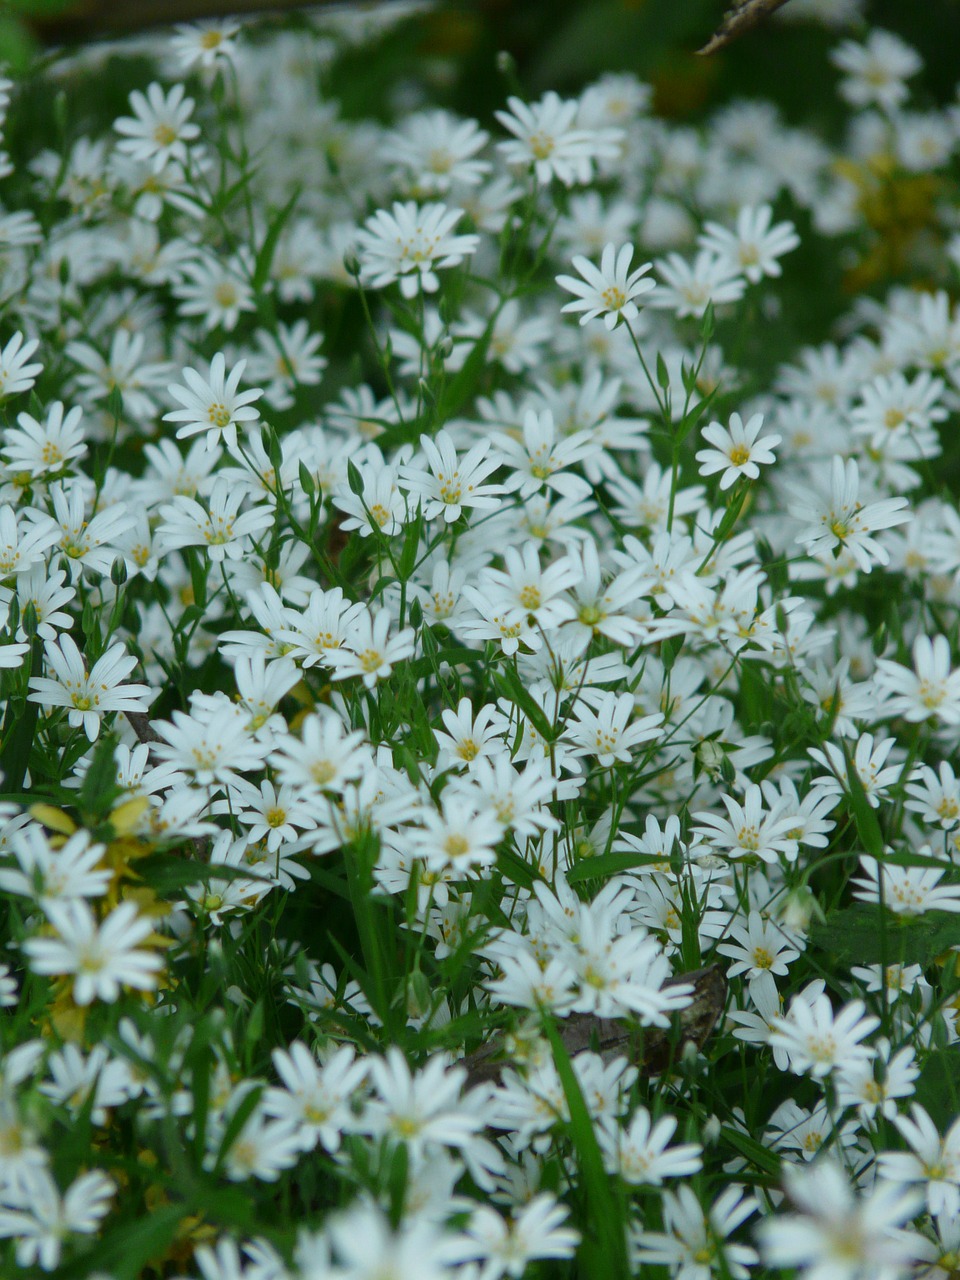 stitchwort,chickweed,carnation family,plant,flower,bloom,white,flora,spring,wild flower,pointed flower,free pictures, free photos, free images, royalty free, free illustrations, public domain